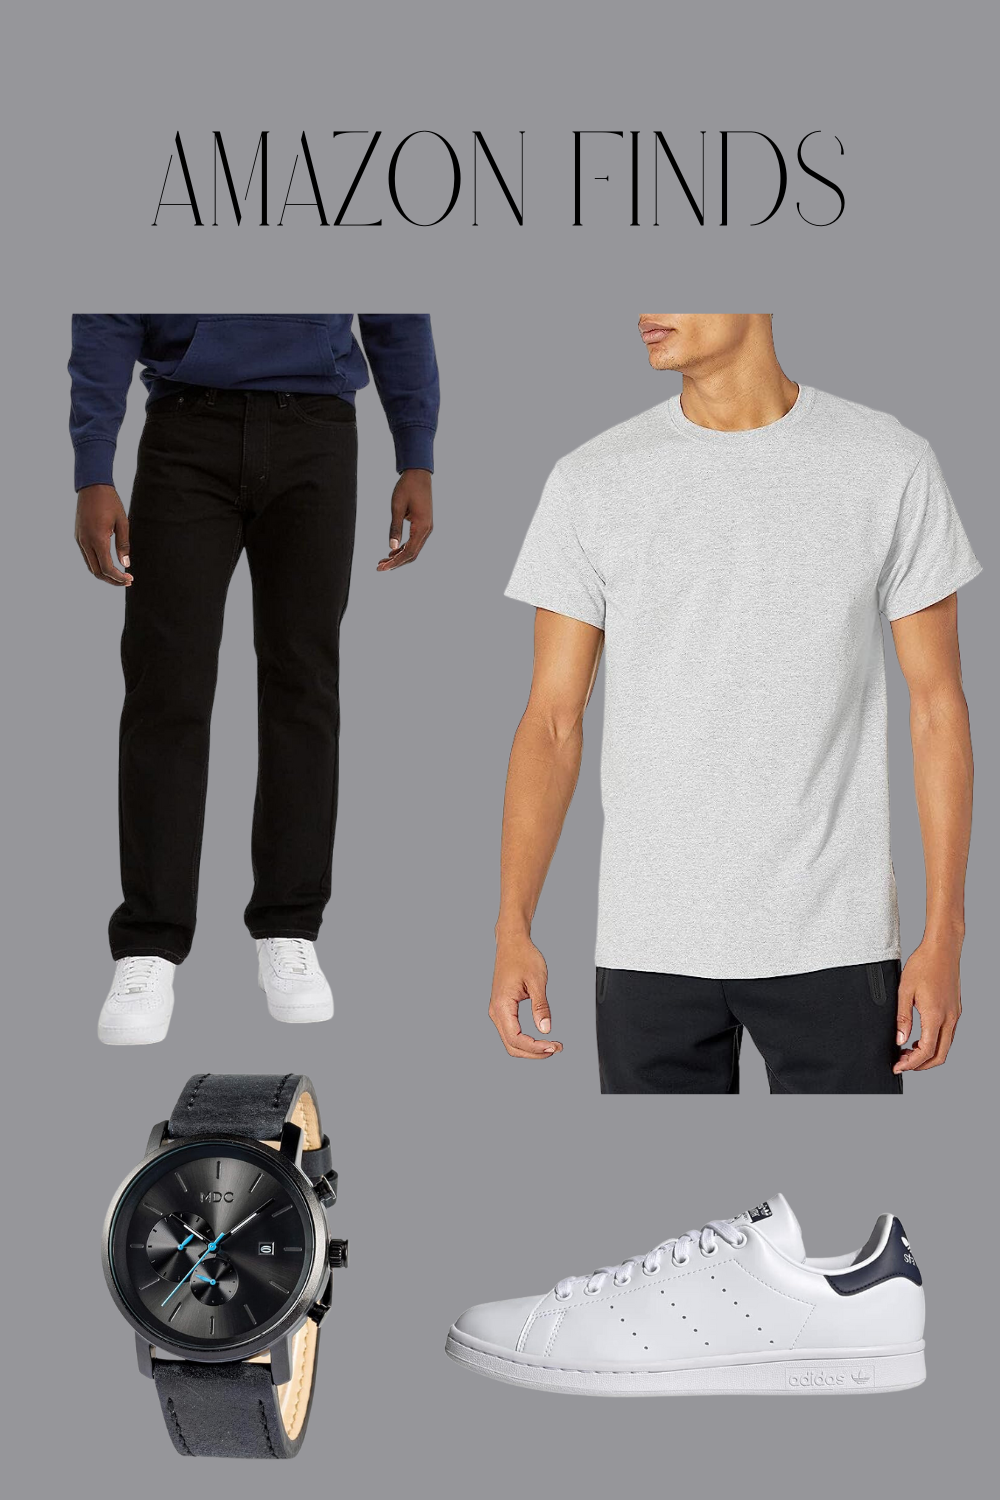 The Perfect Casual Outfit: Amazon Finds for Stylish Men | by Trend Crafty |  Medium